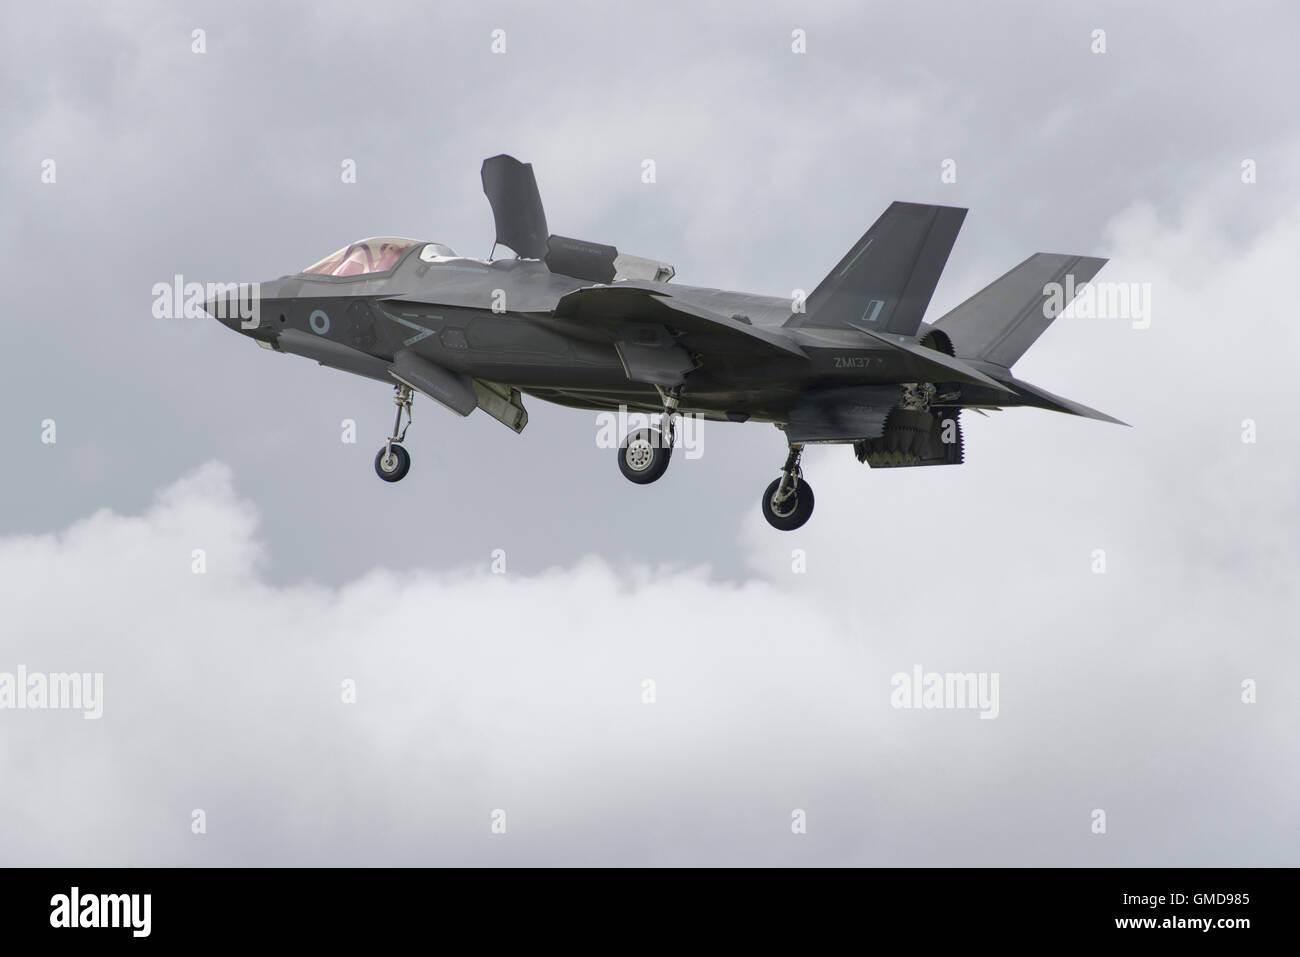 The United Kingdom's first 5th generation fighter jet, the Lockheed F-35B Lightning II demonstrates it's hovering ability Stock Photo